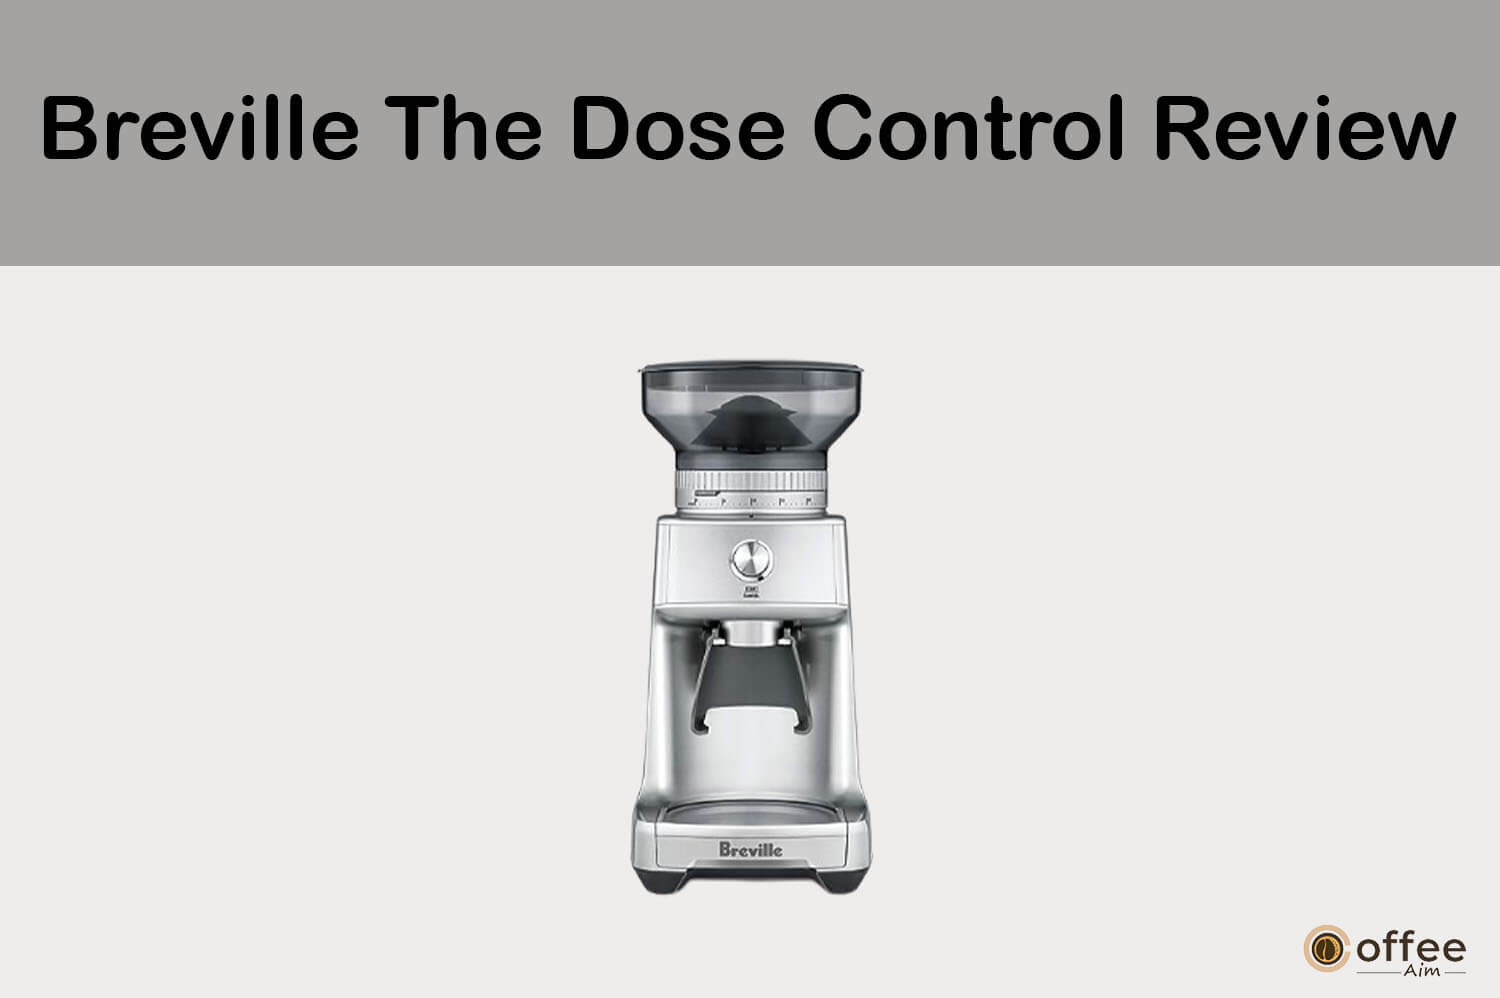 Featured image for the article '' Breville The Dose Control Review''